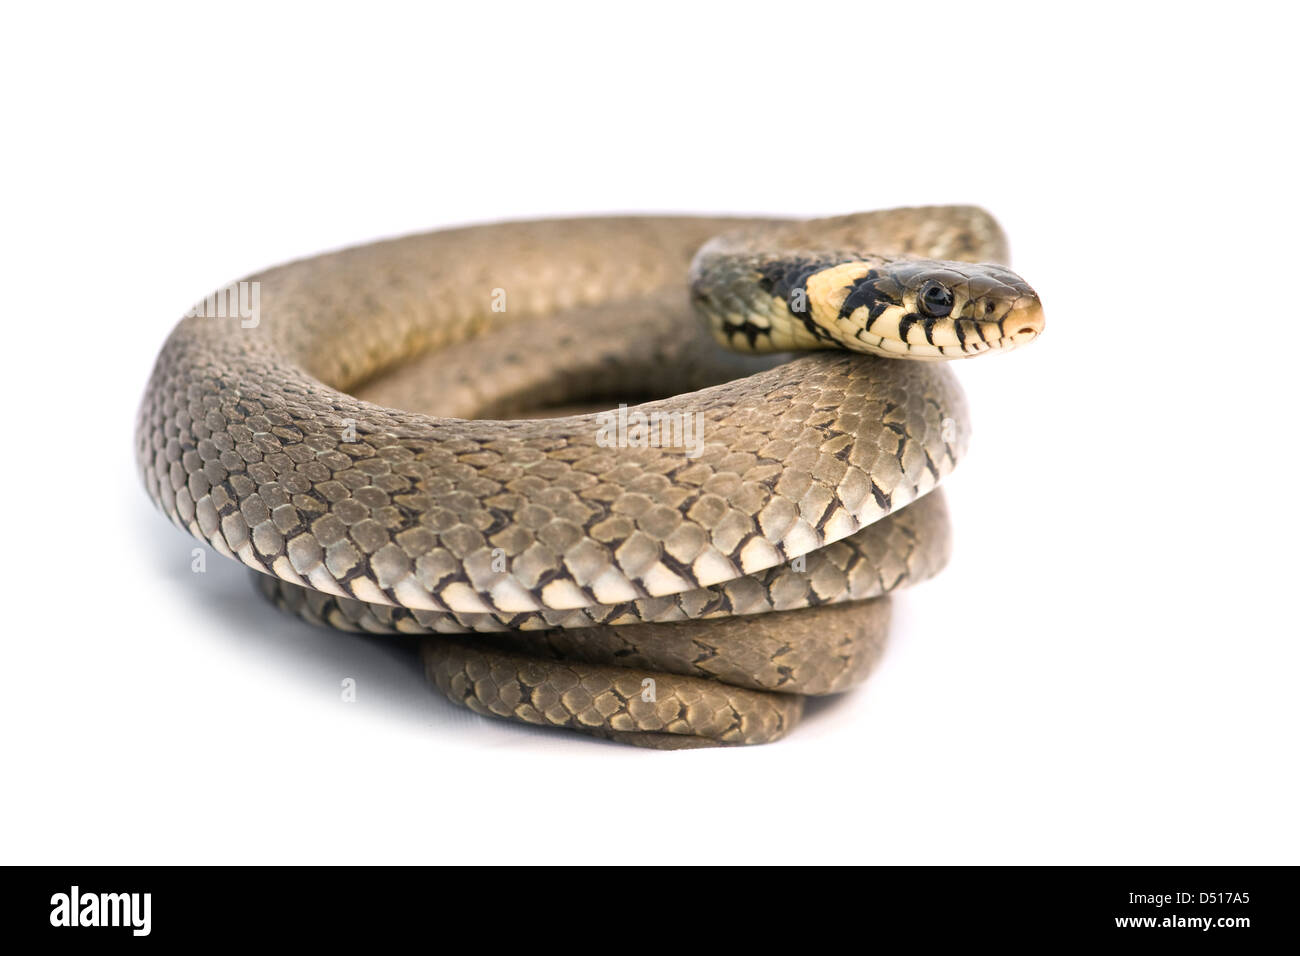 https://c8.alamy.com/comp/D517A5/snake-isolated-on-white-background-D517A5.jpg